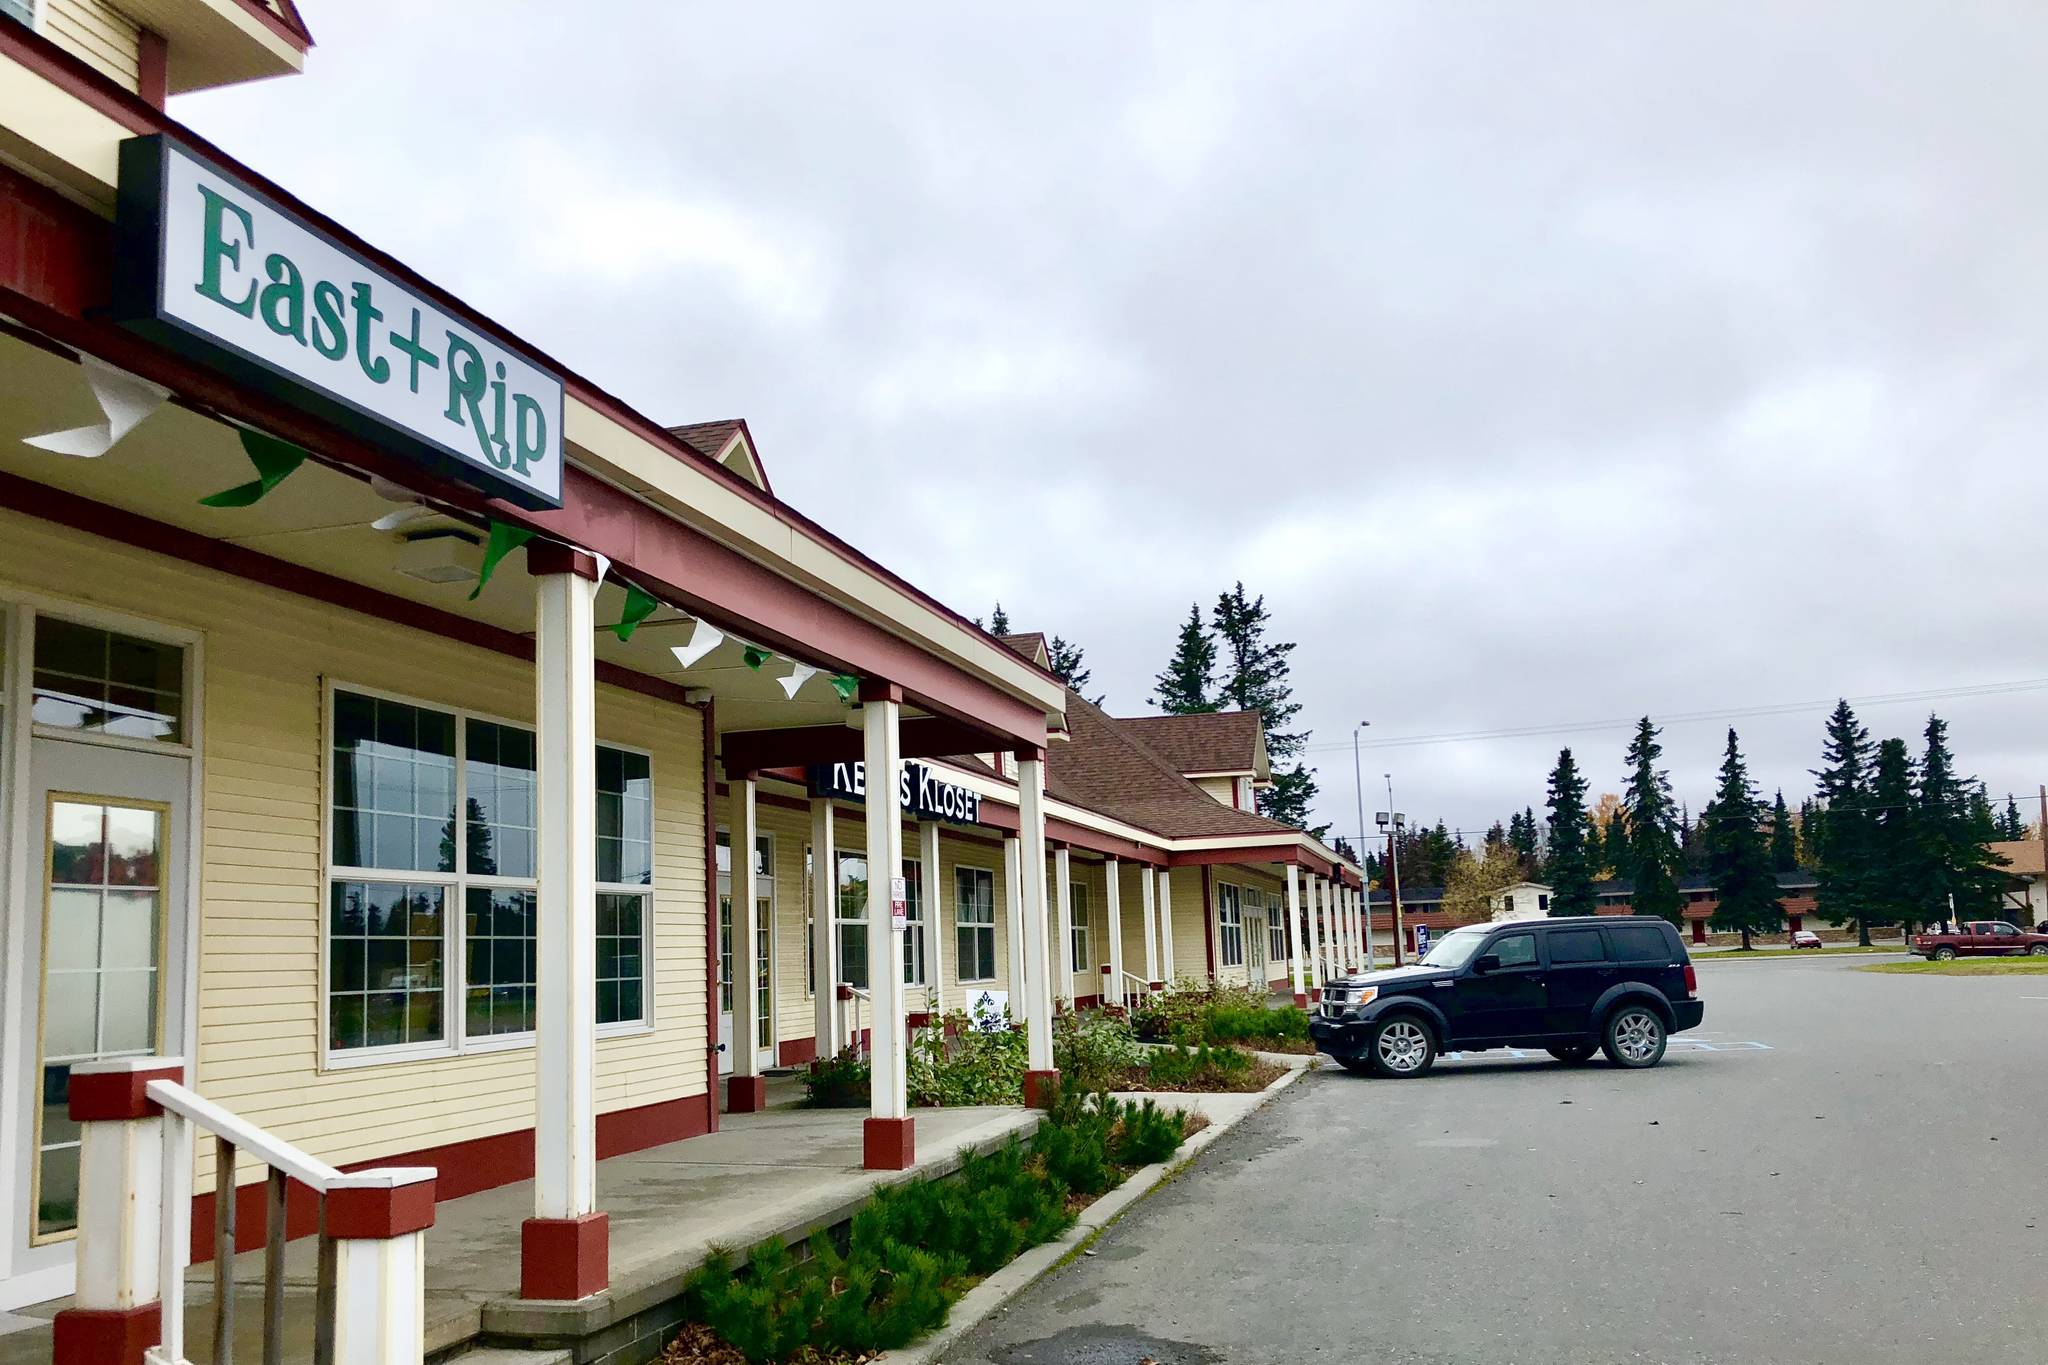 East Rip, a new marijuana retailer, is photographed on Monday, Oct. 8, 2018, in Kenai, Alaska. The new business is situated in a busy, central part of Kenai. (Photo by Victoria Petersen/Peninsula Clarion)